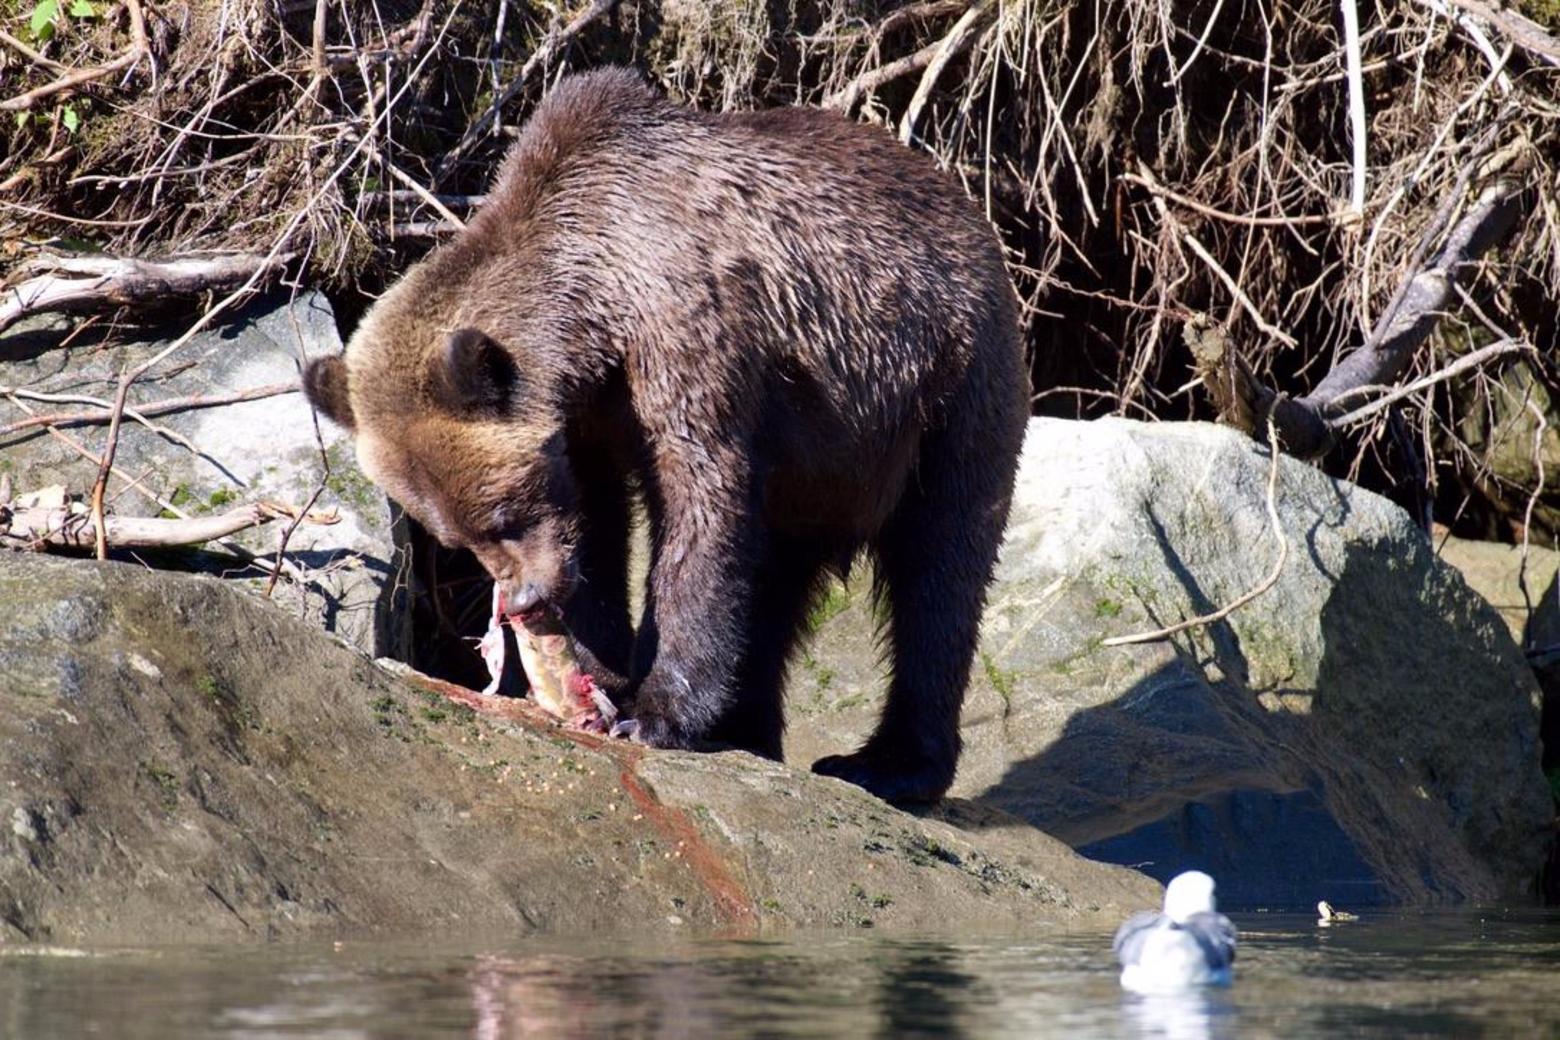 A grizzly along the Pacific Coast in Canada feasting upon spawning salmon.  Photo courtesy Dr. Paul C. Paquet